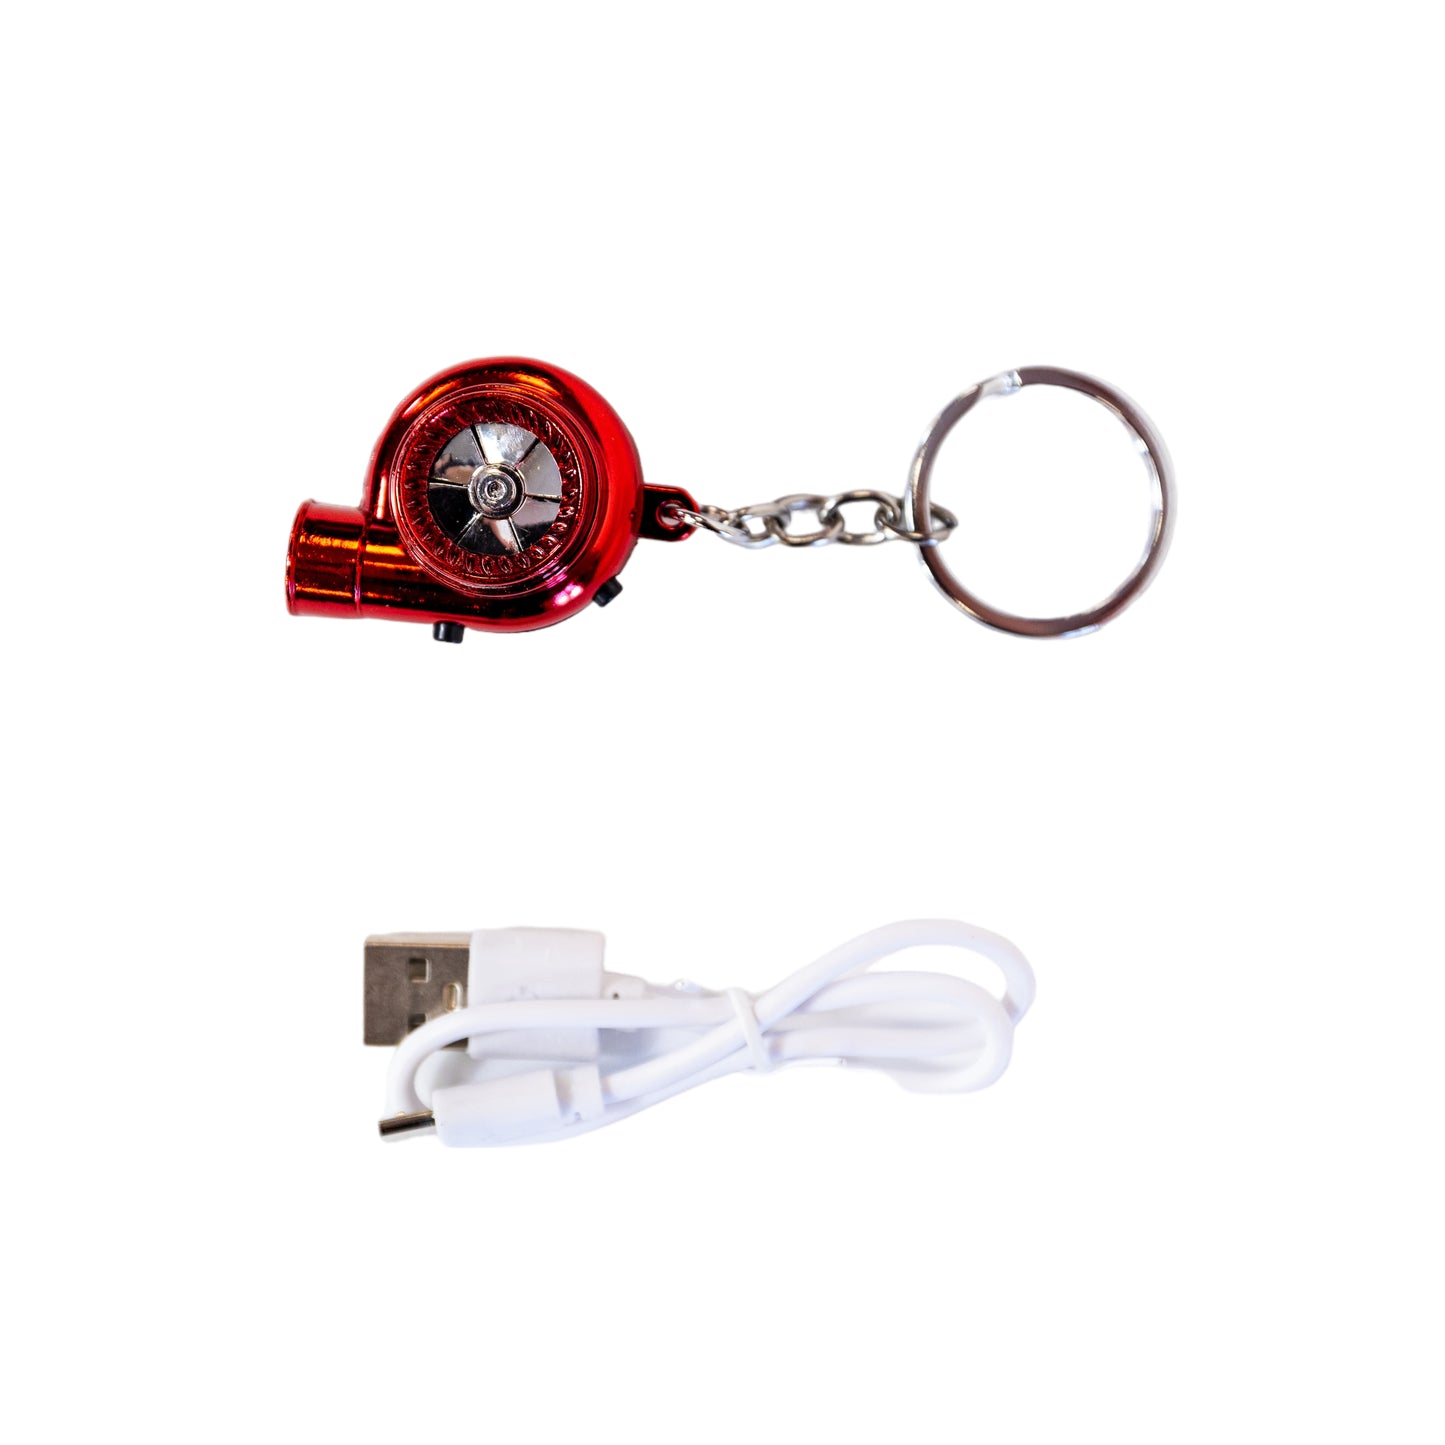 S&M Diesel electric turbo keychain- rechargeable- 4 colors avail